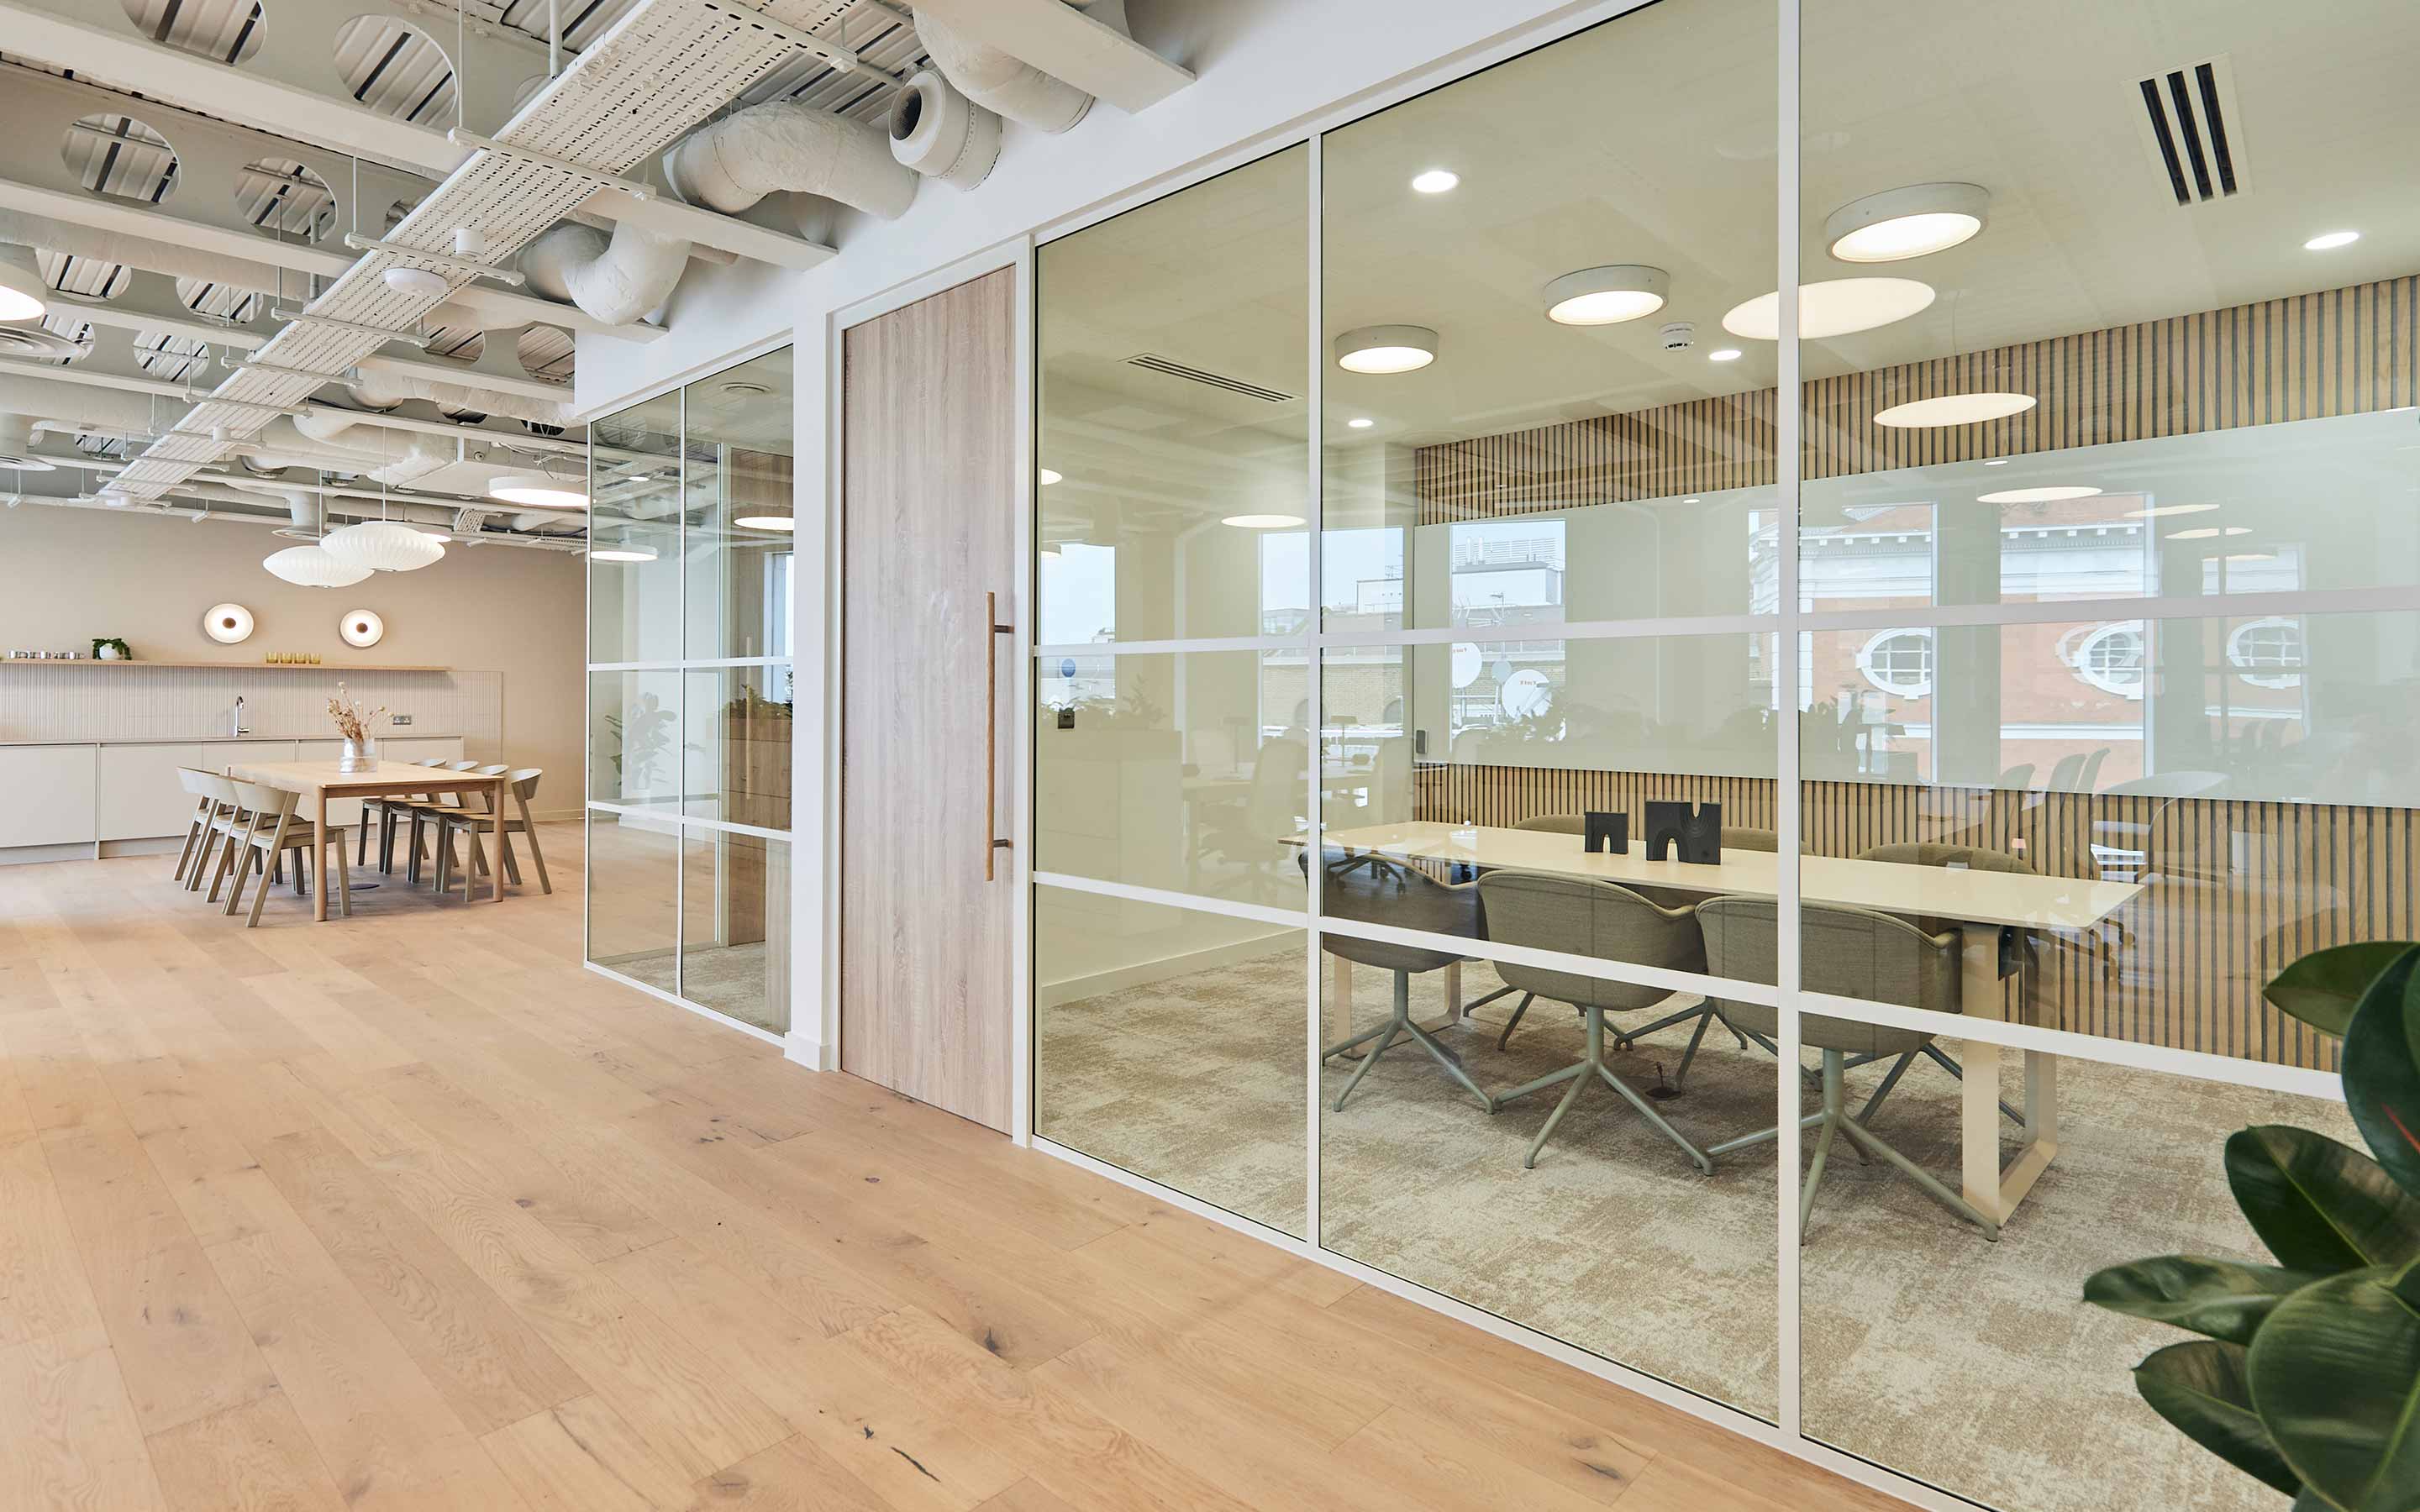 Glass walled meeting rooms in a contemporary office, with wooden finishes and a calming aesthetic